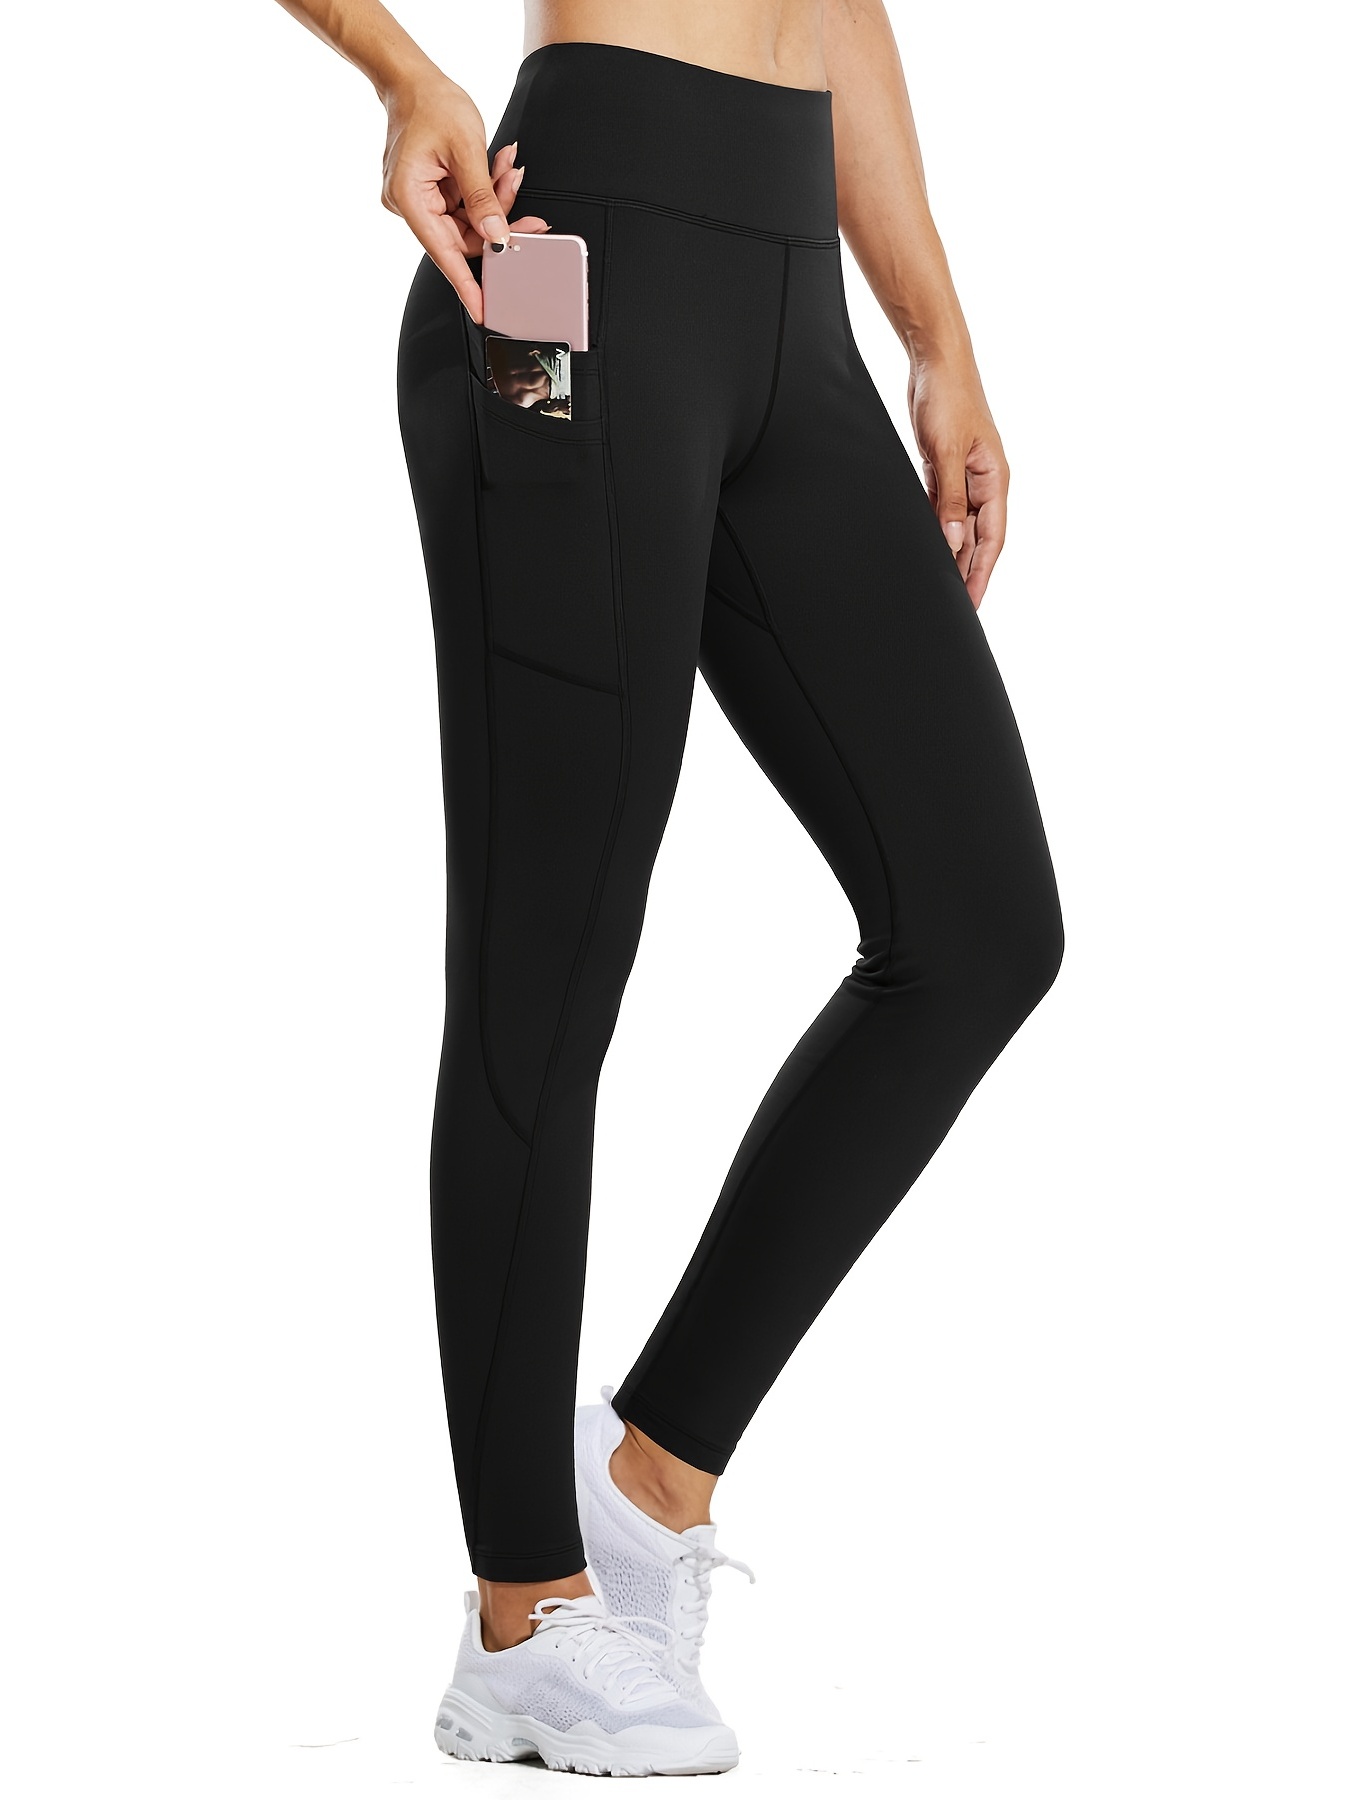 Buy Black Fleece Lined Thermal Tights from Next Sweden